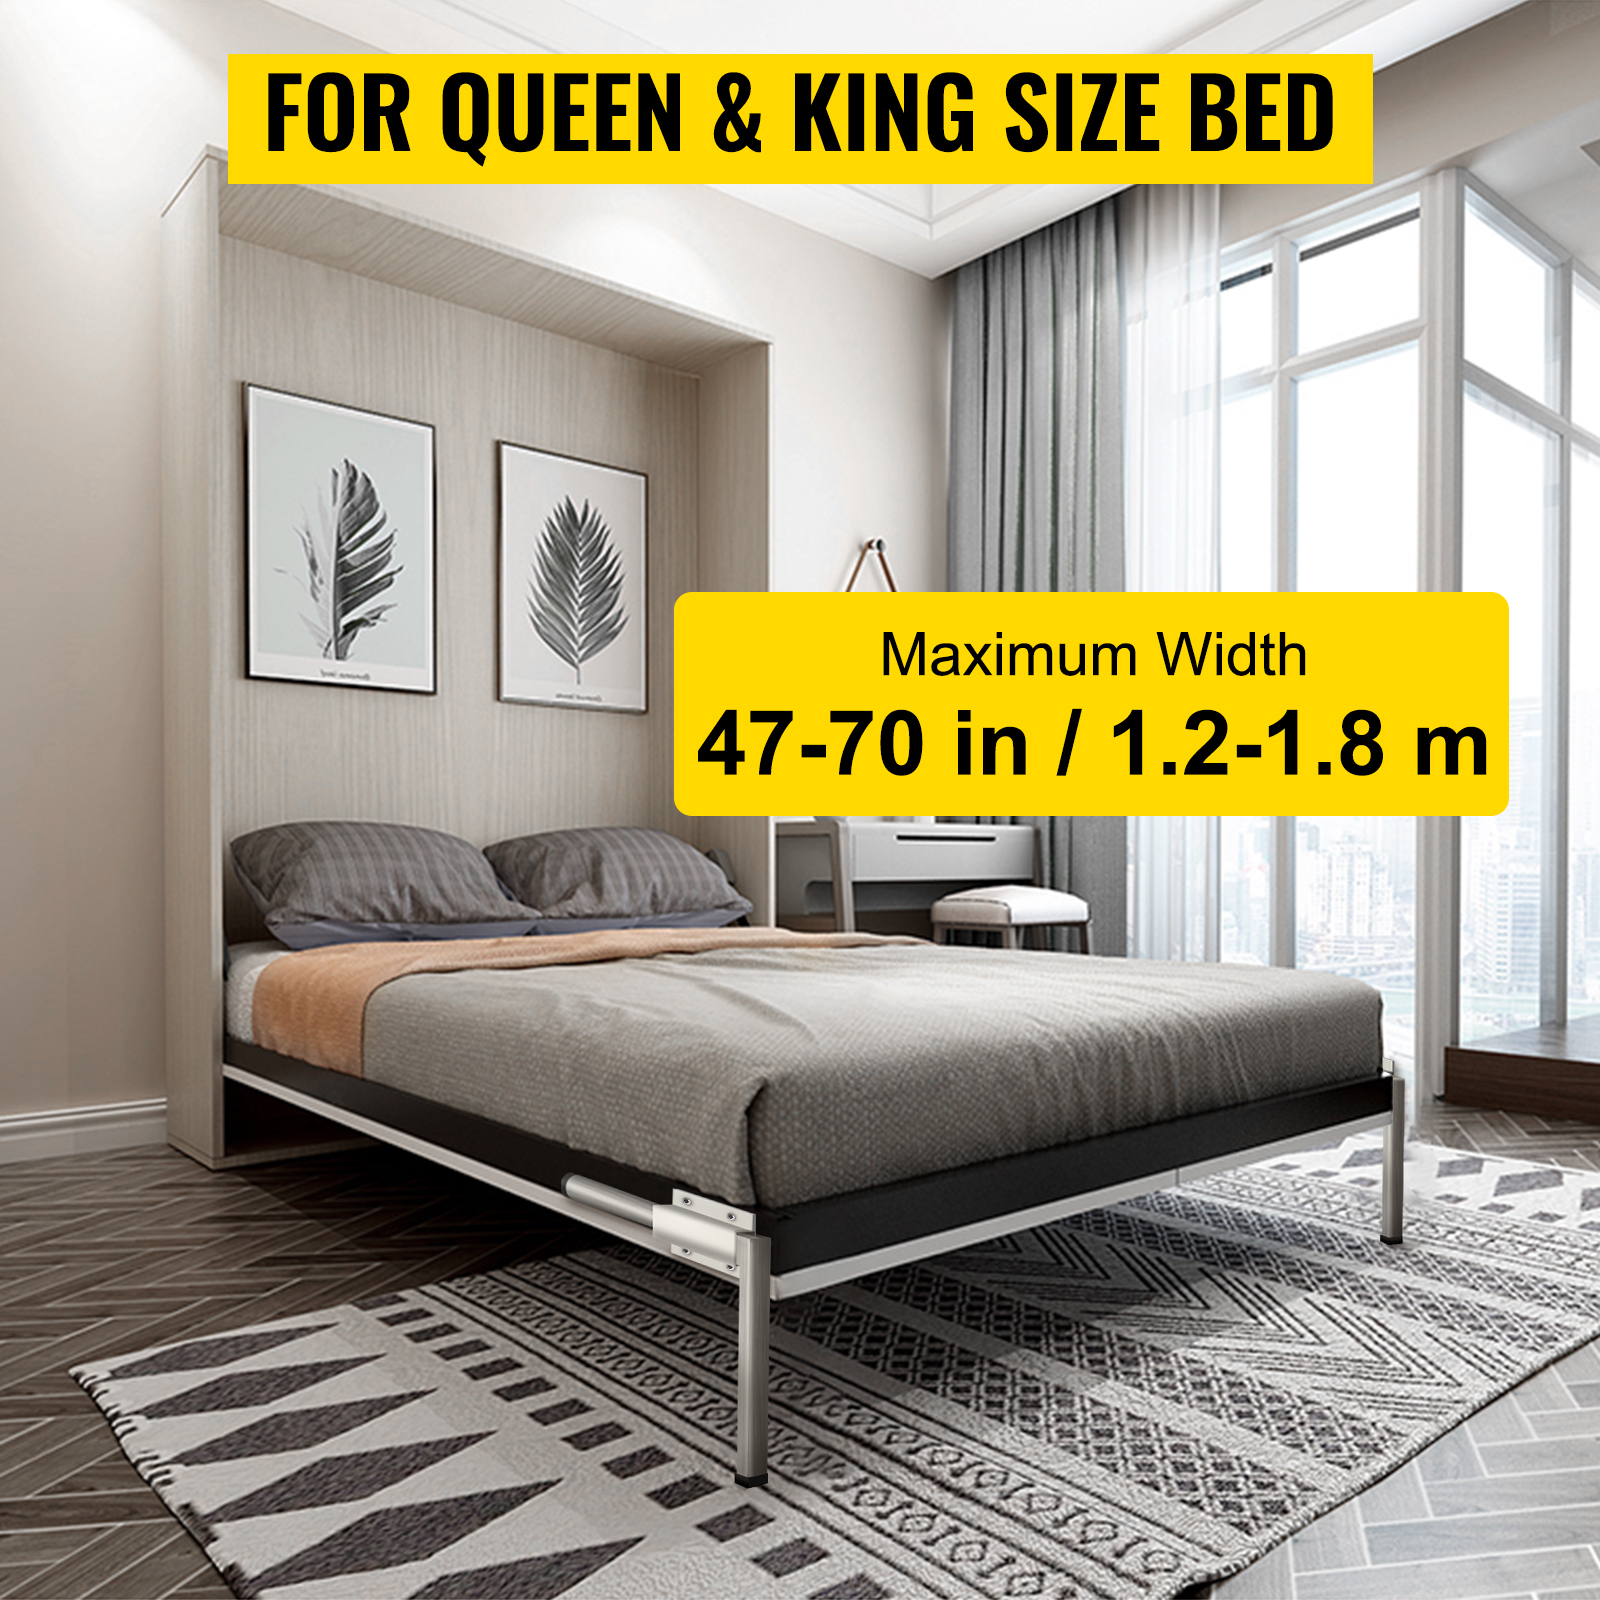 Murphy Wall Bed Springs Mechanism Hardware Kit White Durable King or Queen Size 